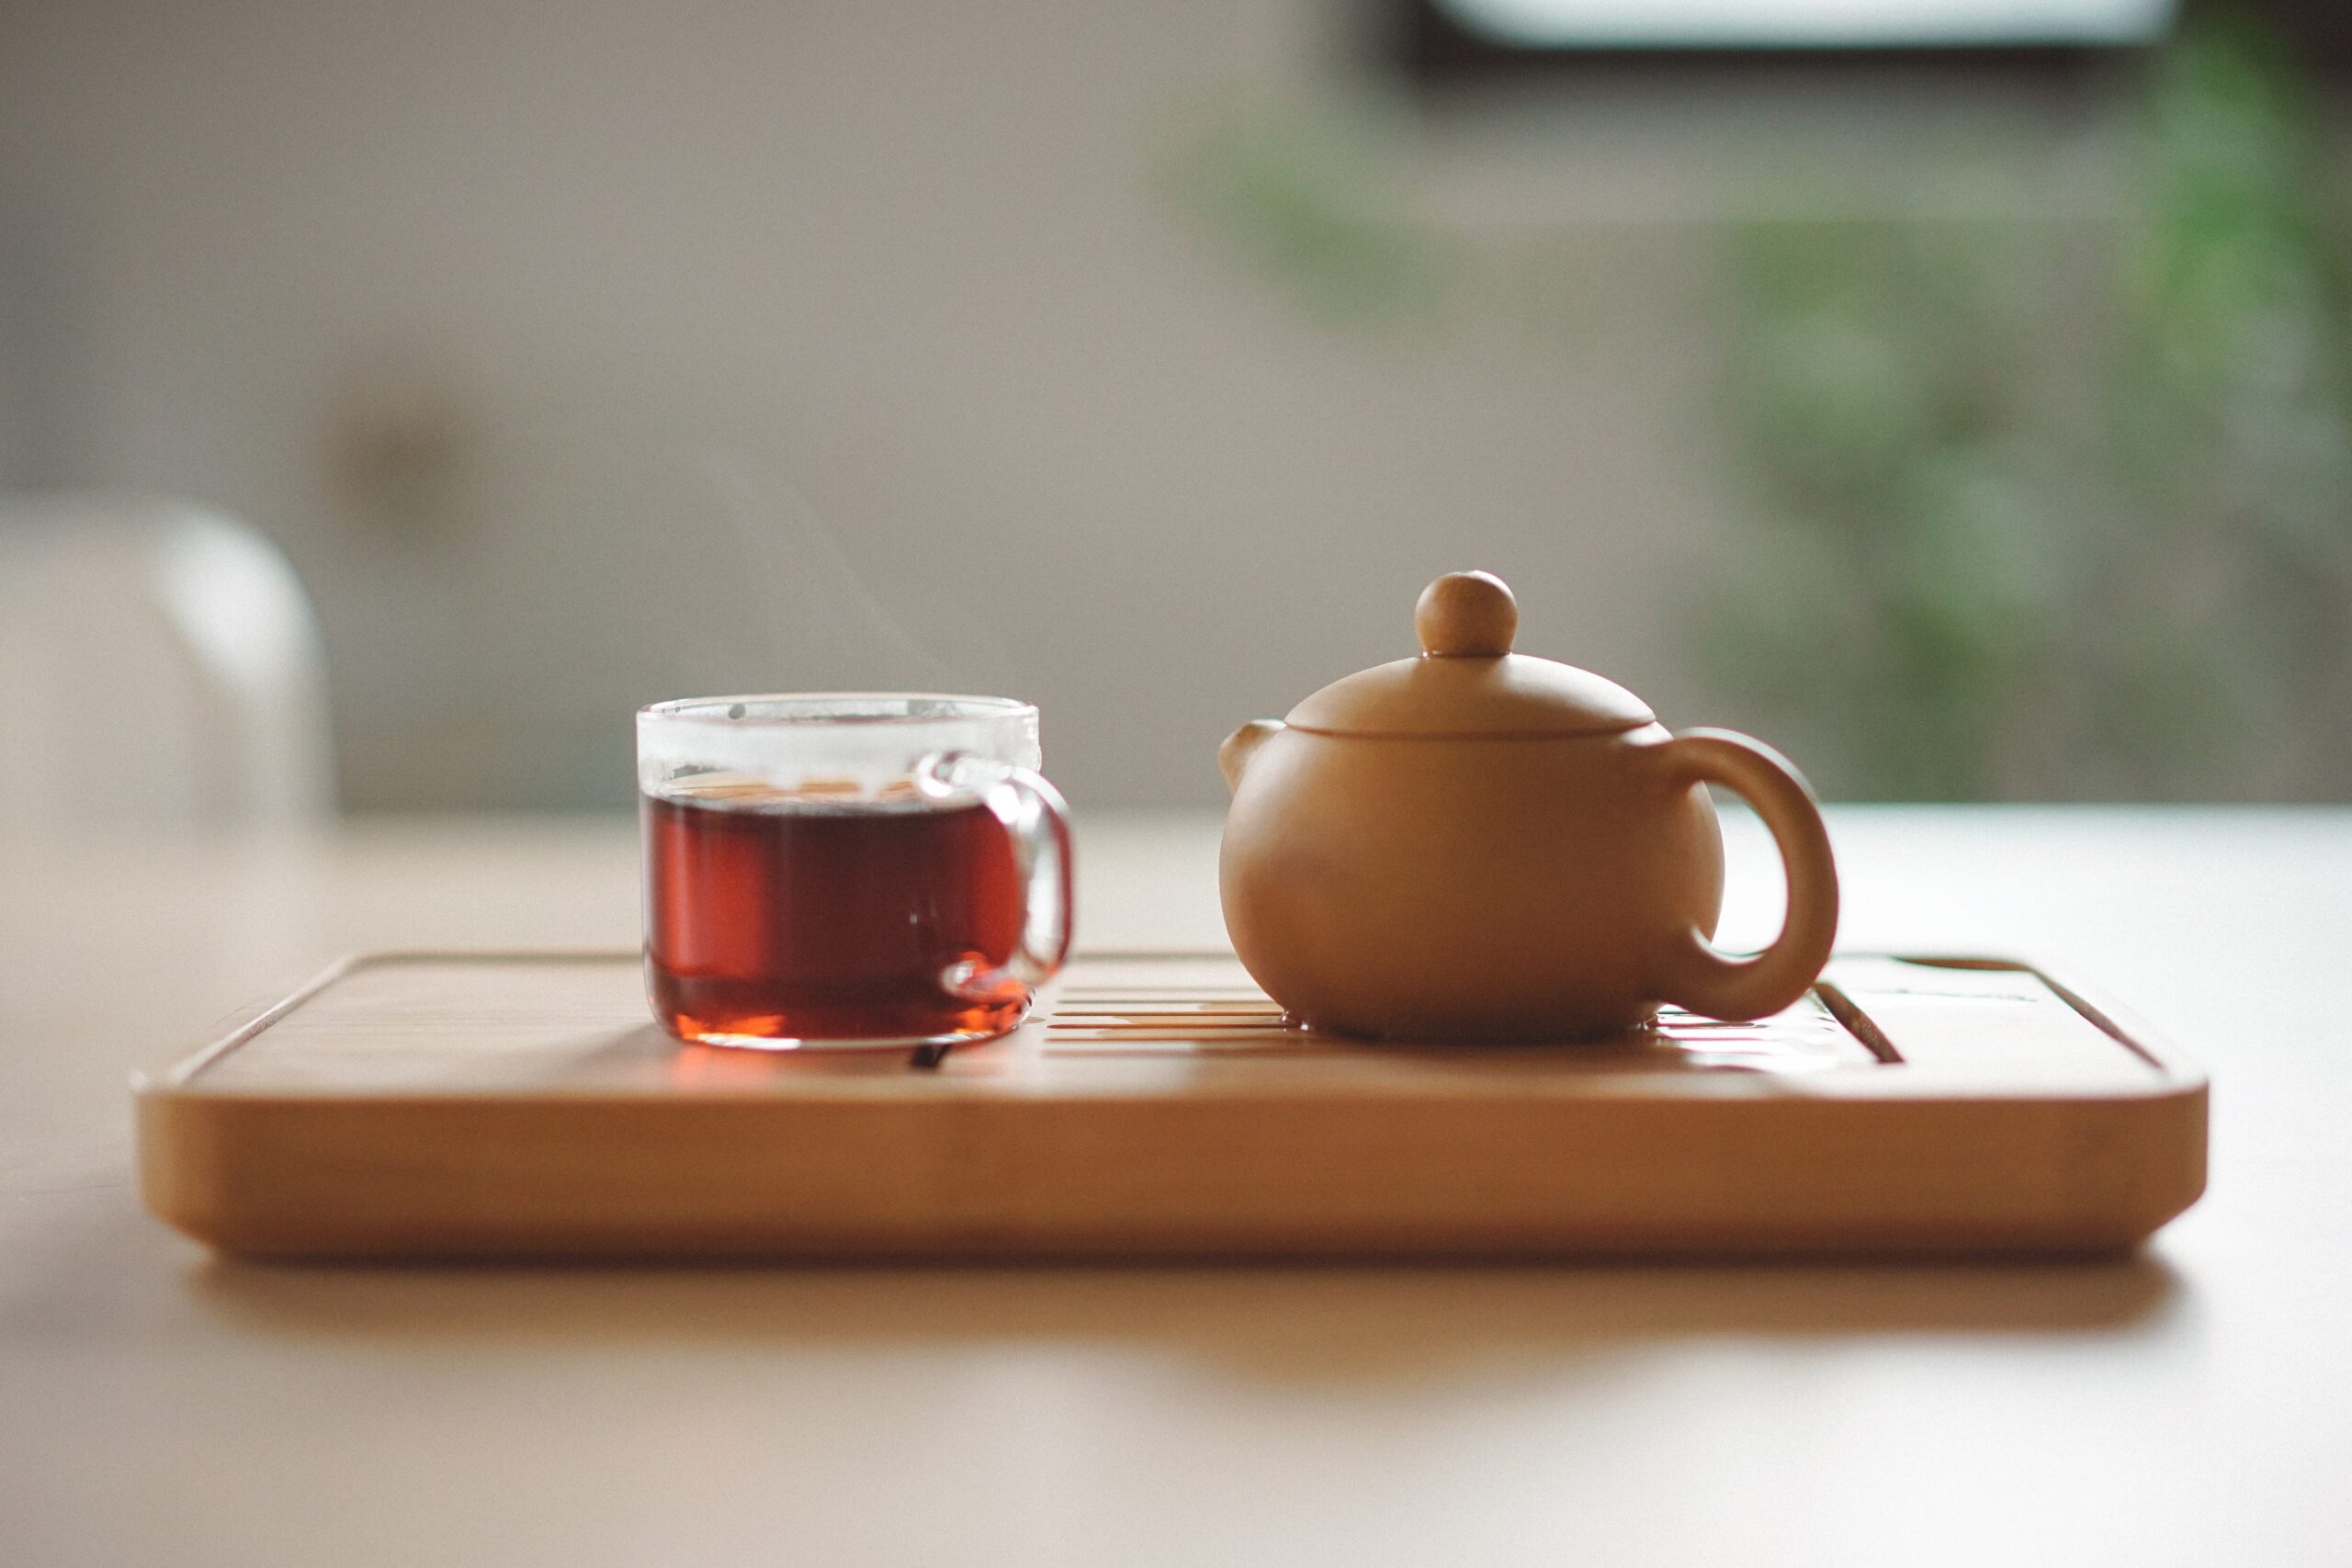 Clear-glass-cup-with-tea-near-the-brown-ceramic-teapot